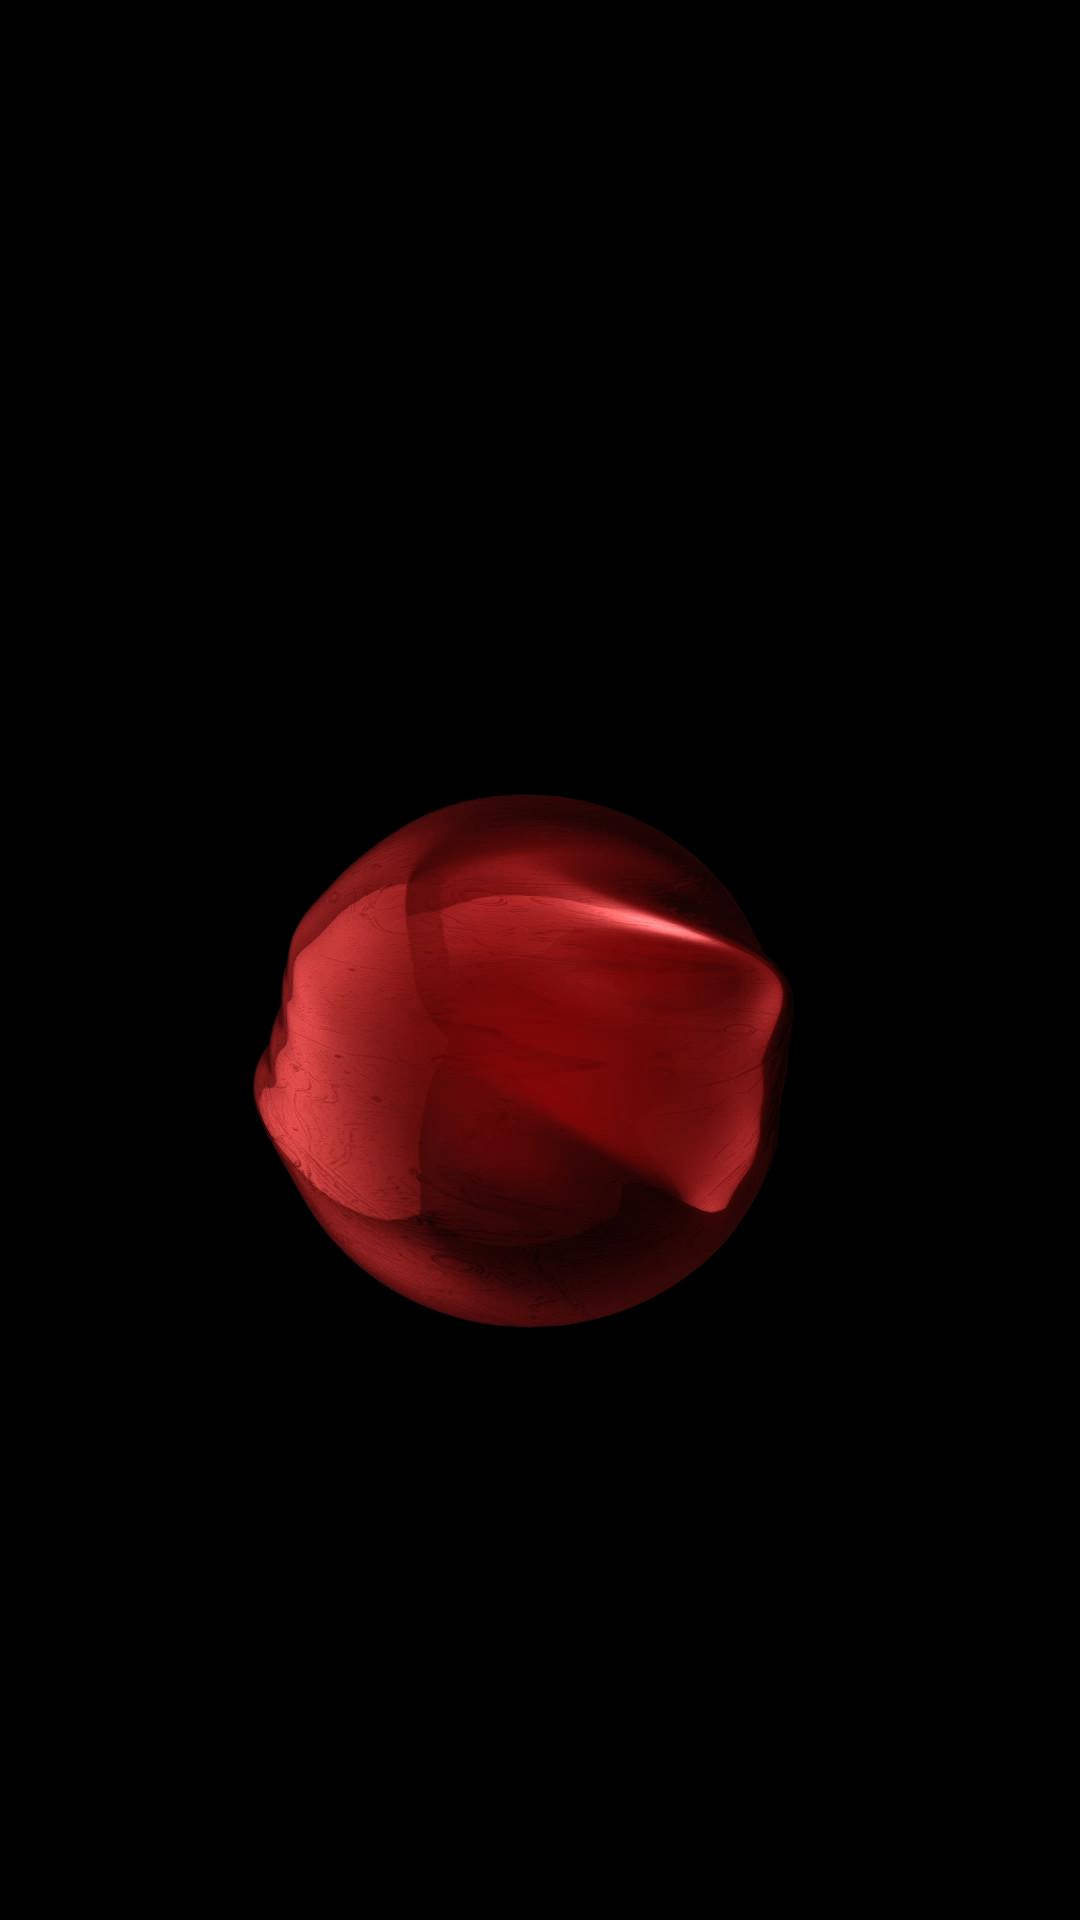 Shiny Apple Red Iphone Background